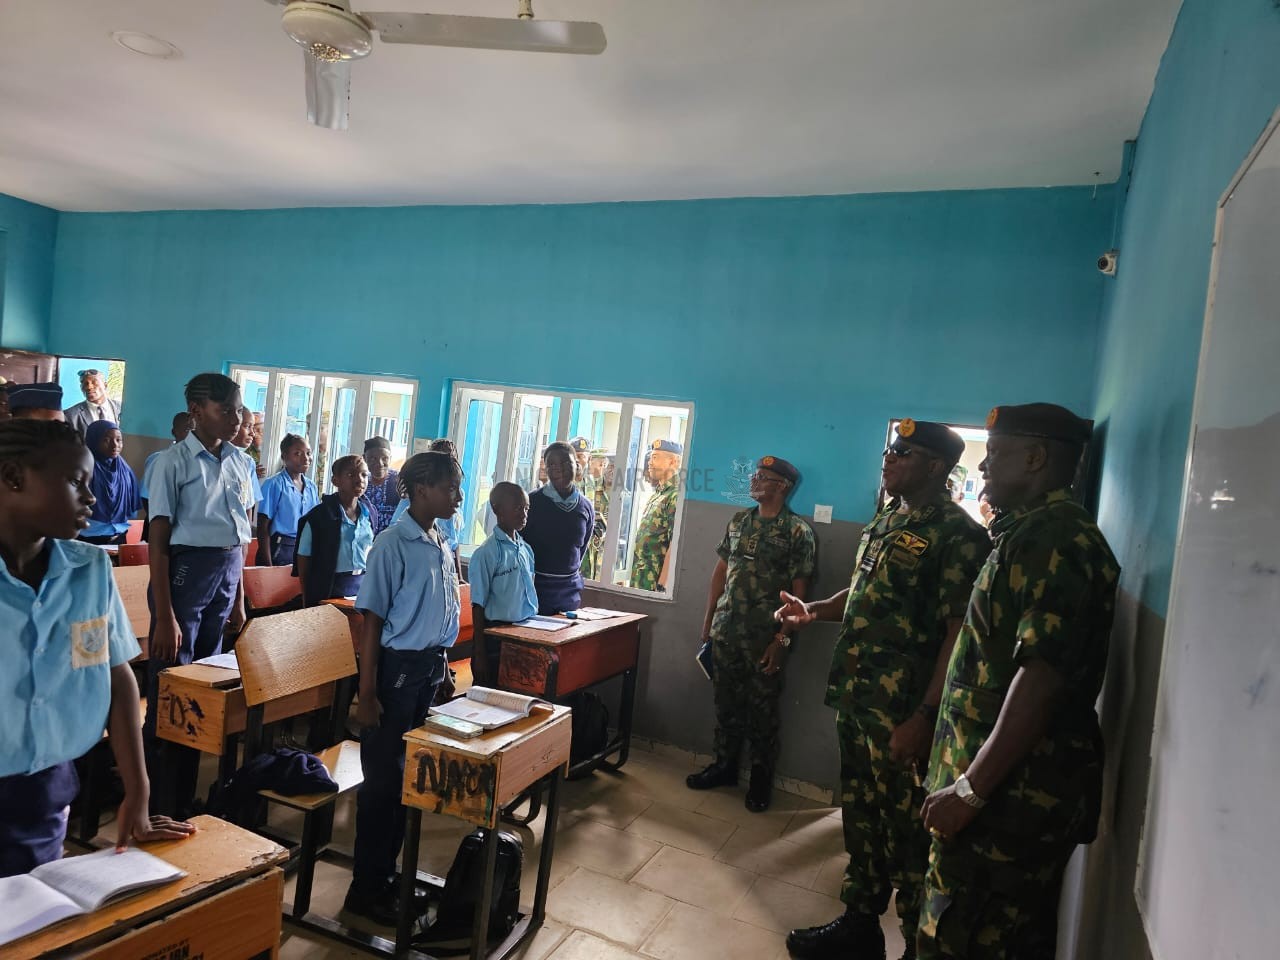 SAFETY, WELLBEING AND ACADEMIC EXCELLENCE OF OUR STUDENTS ARE TOP PRIORITIES, SAYS CAS AS HE TOURS AIR FORCE COMPREHENSIVE SCHOOL IBADAN